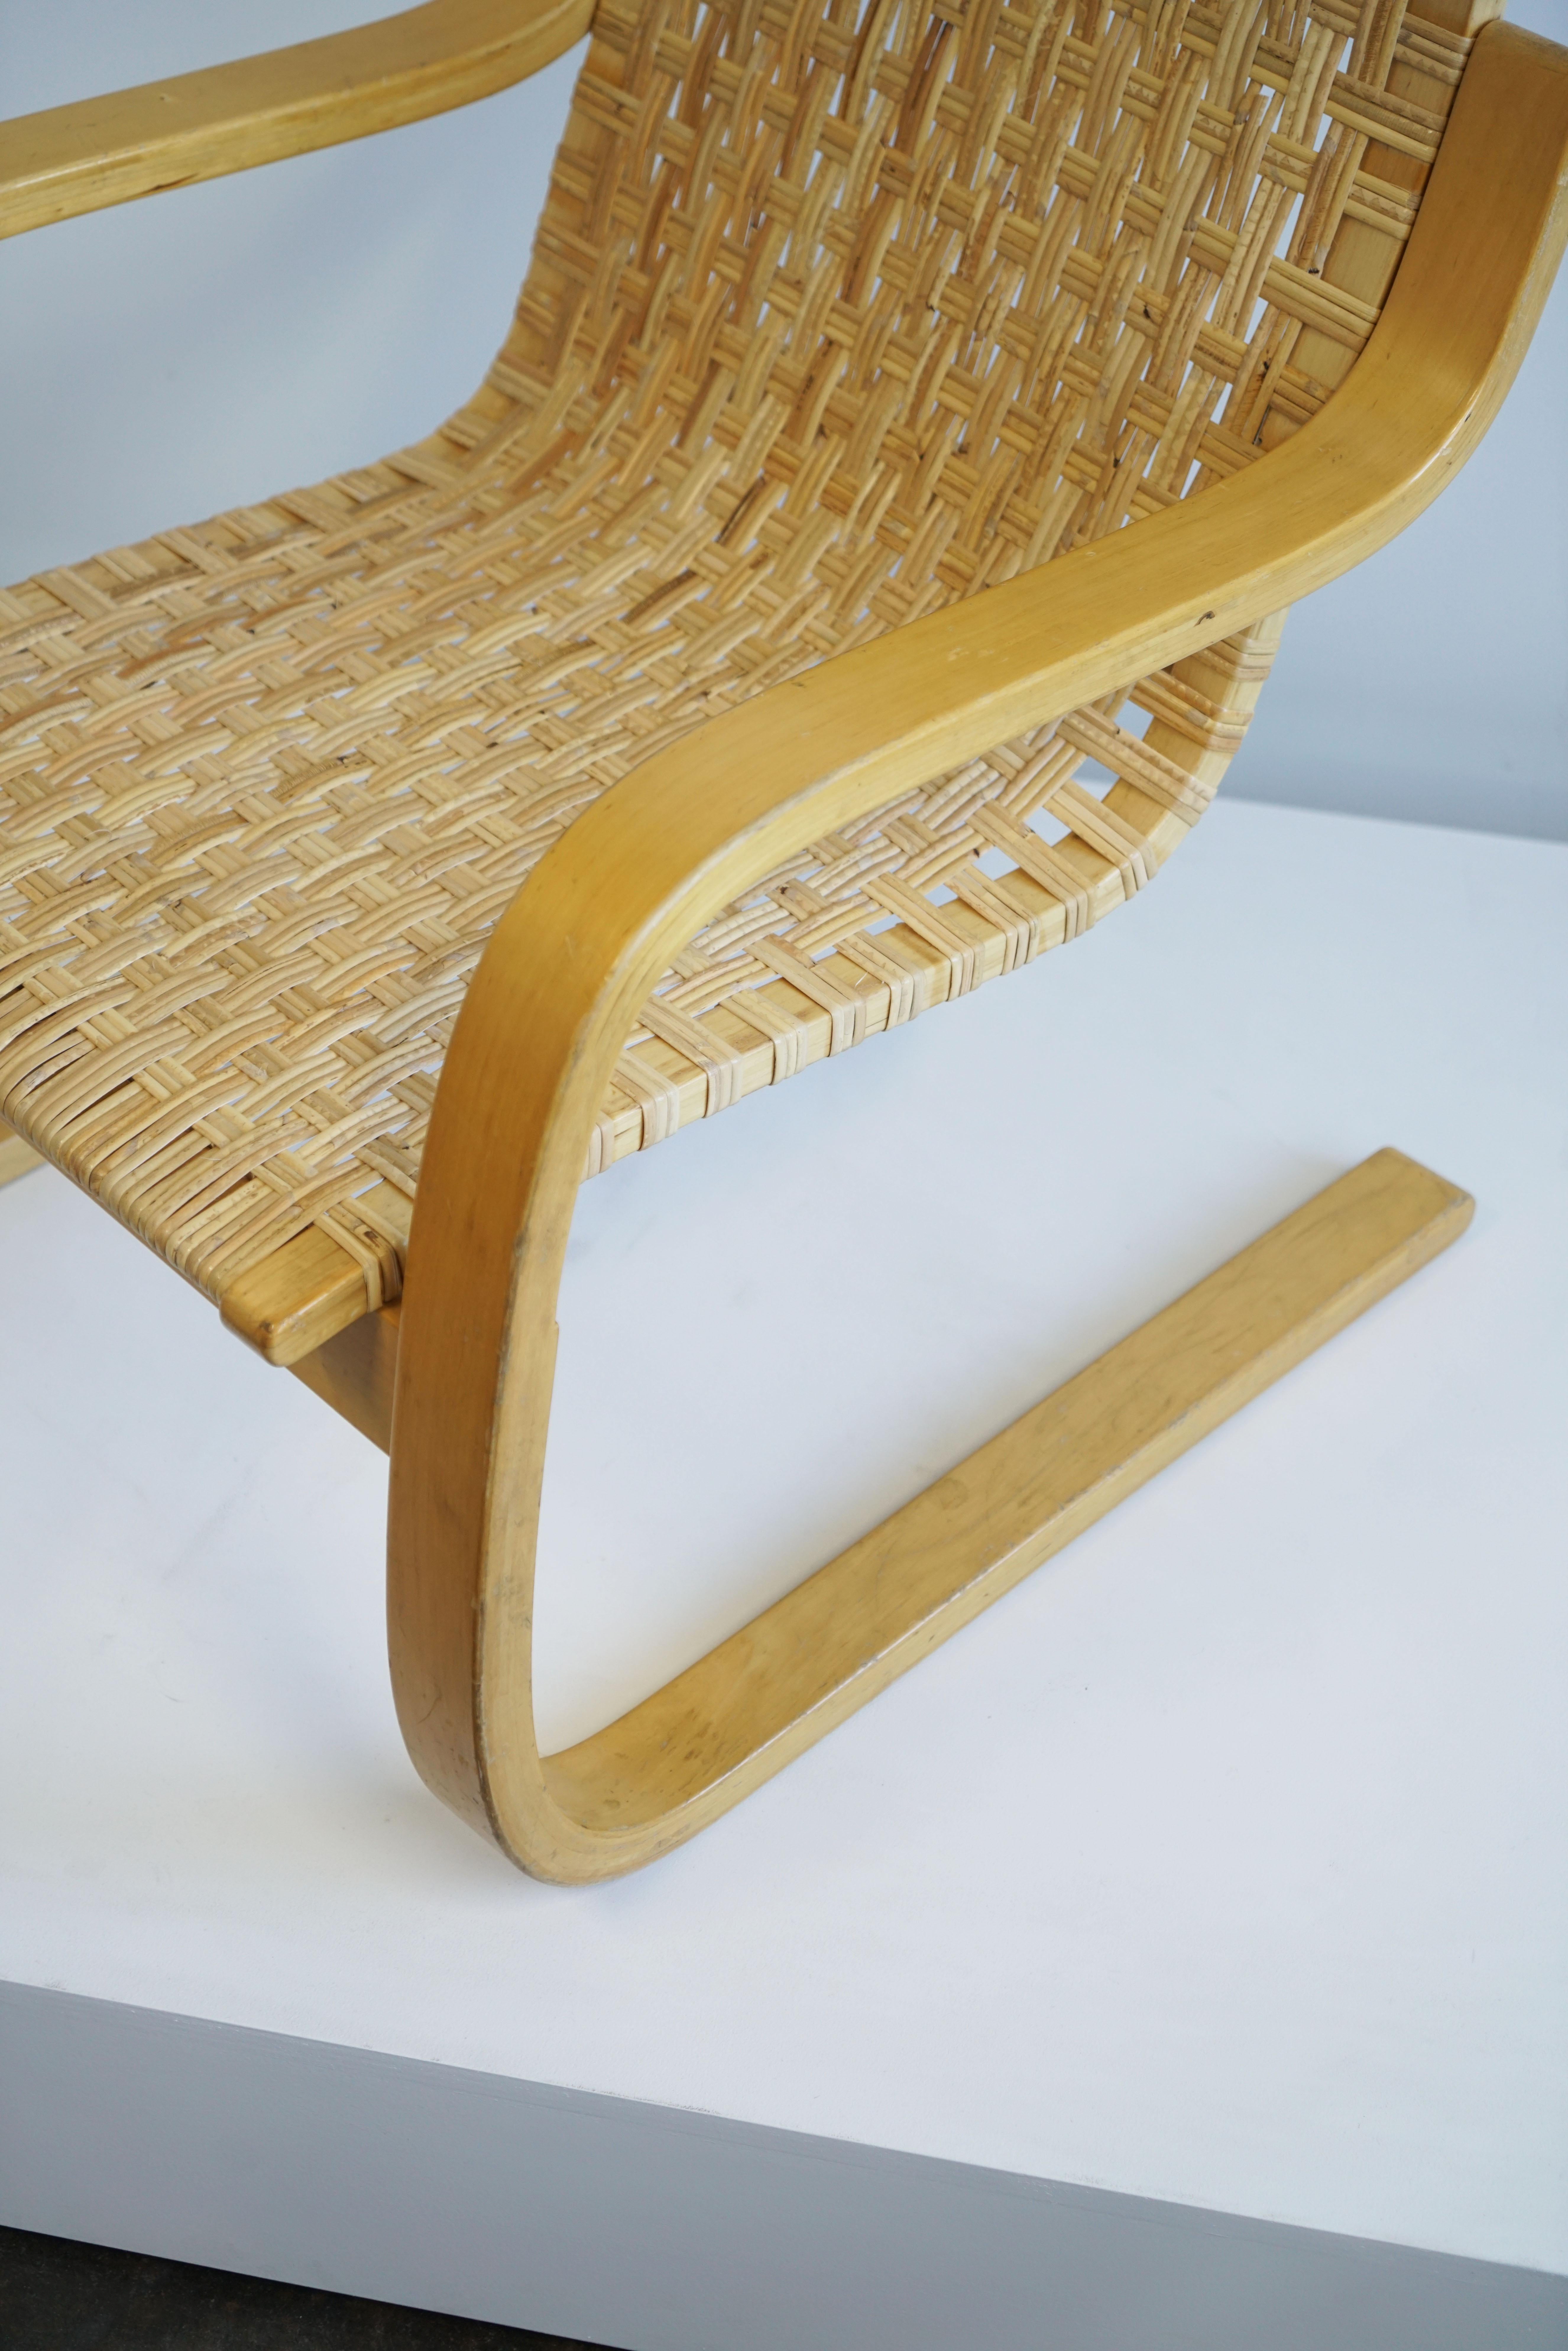 Mid-20th Century Pair of Alvar Aalto Cantilever Chairs Model 406 by Artek in Birch Cane Webbing For Sale